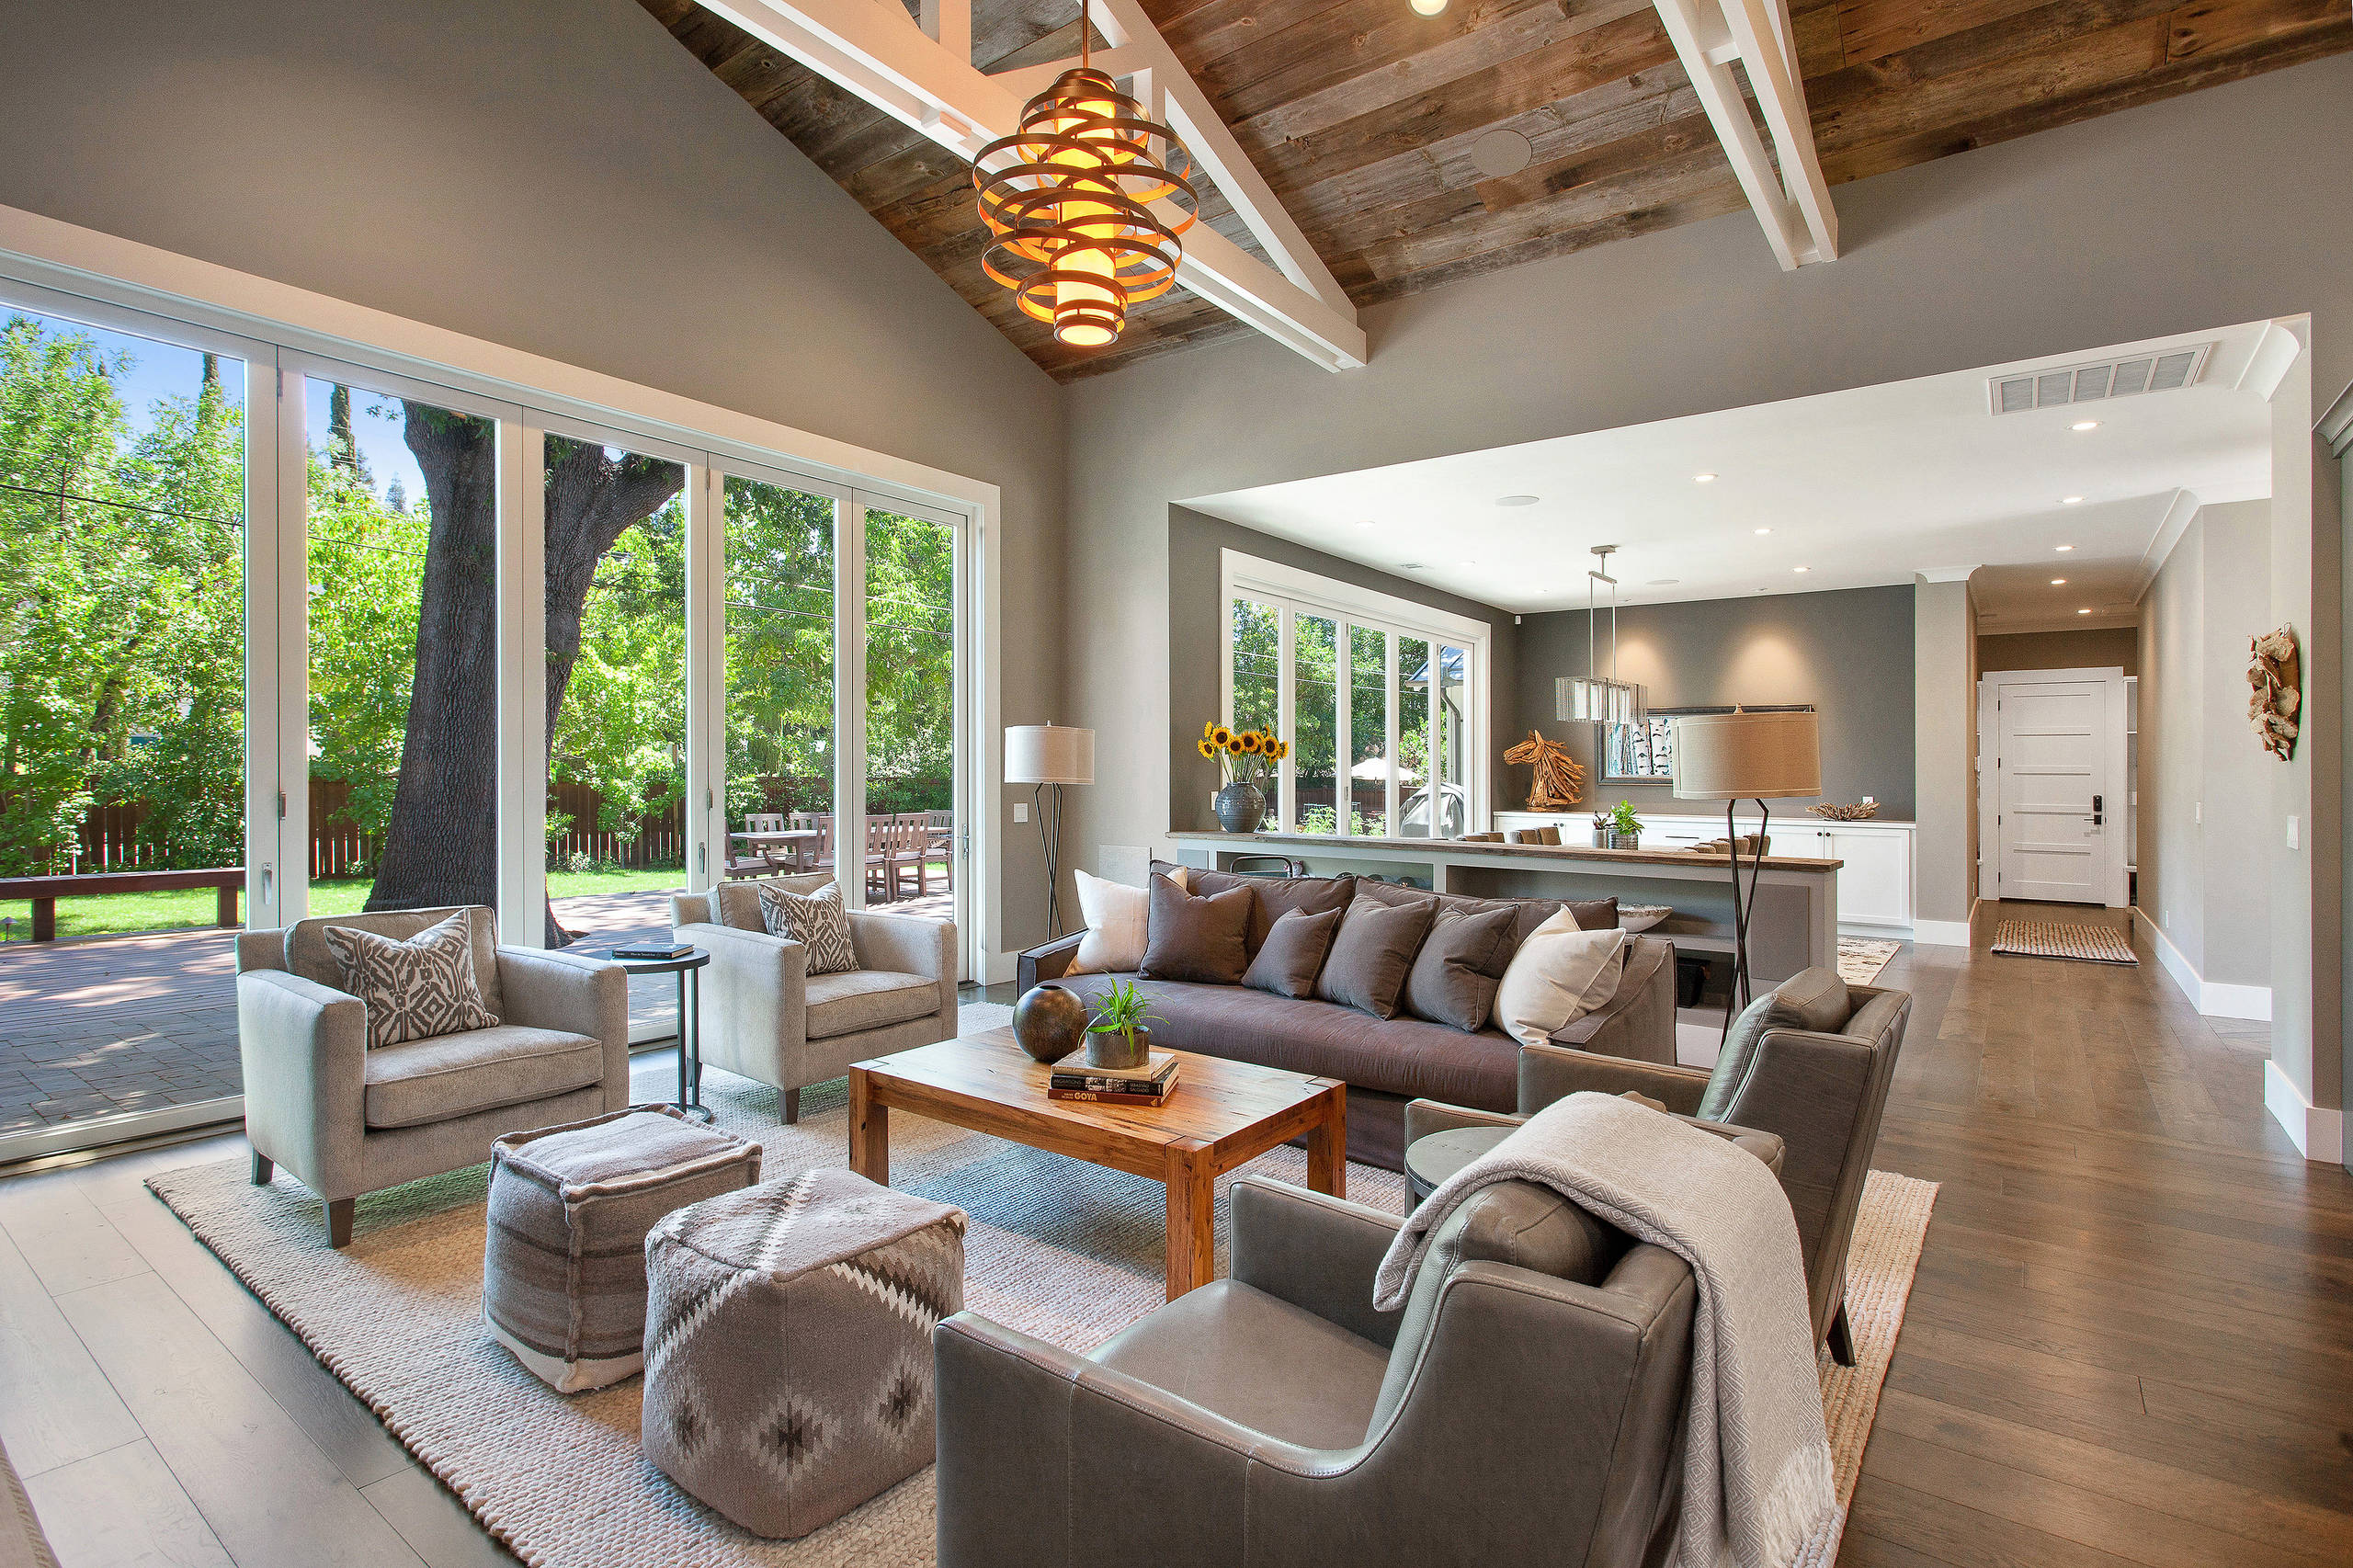 75 Beautiful Farmhouse Living Room Pictures Ideas December 2020 Houzz